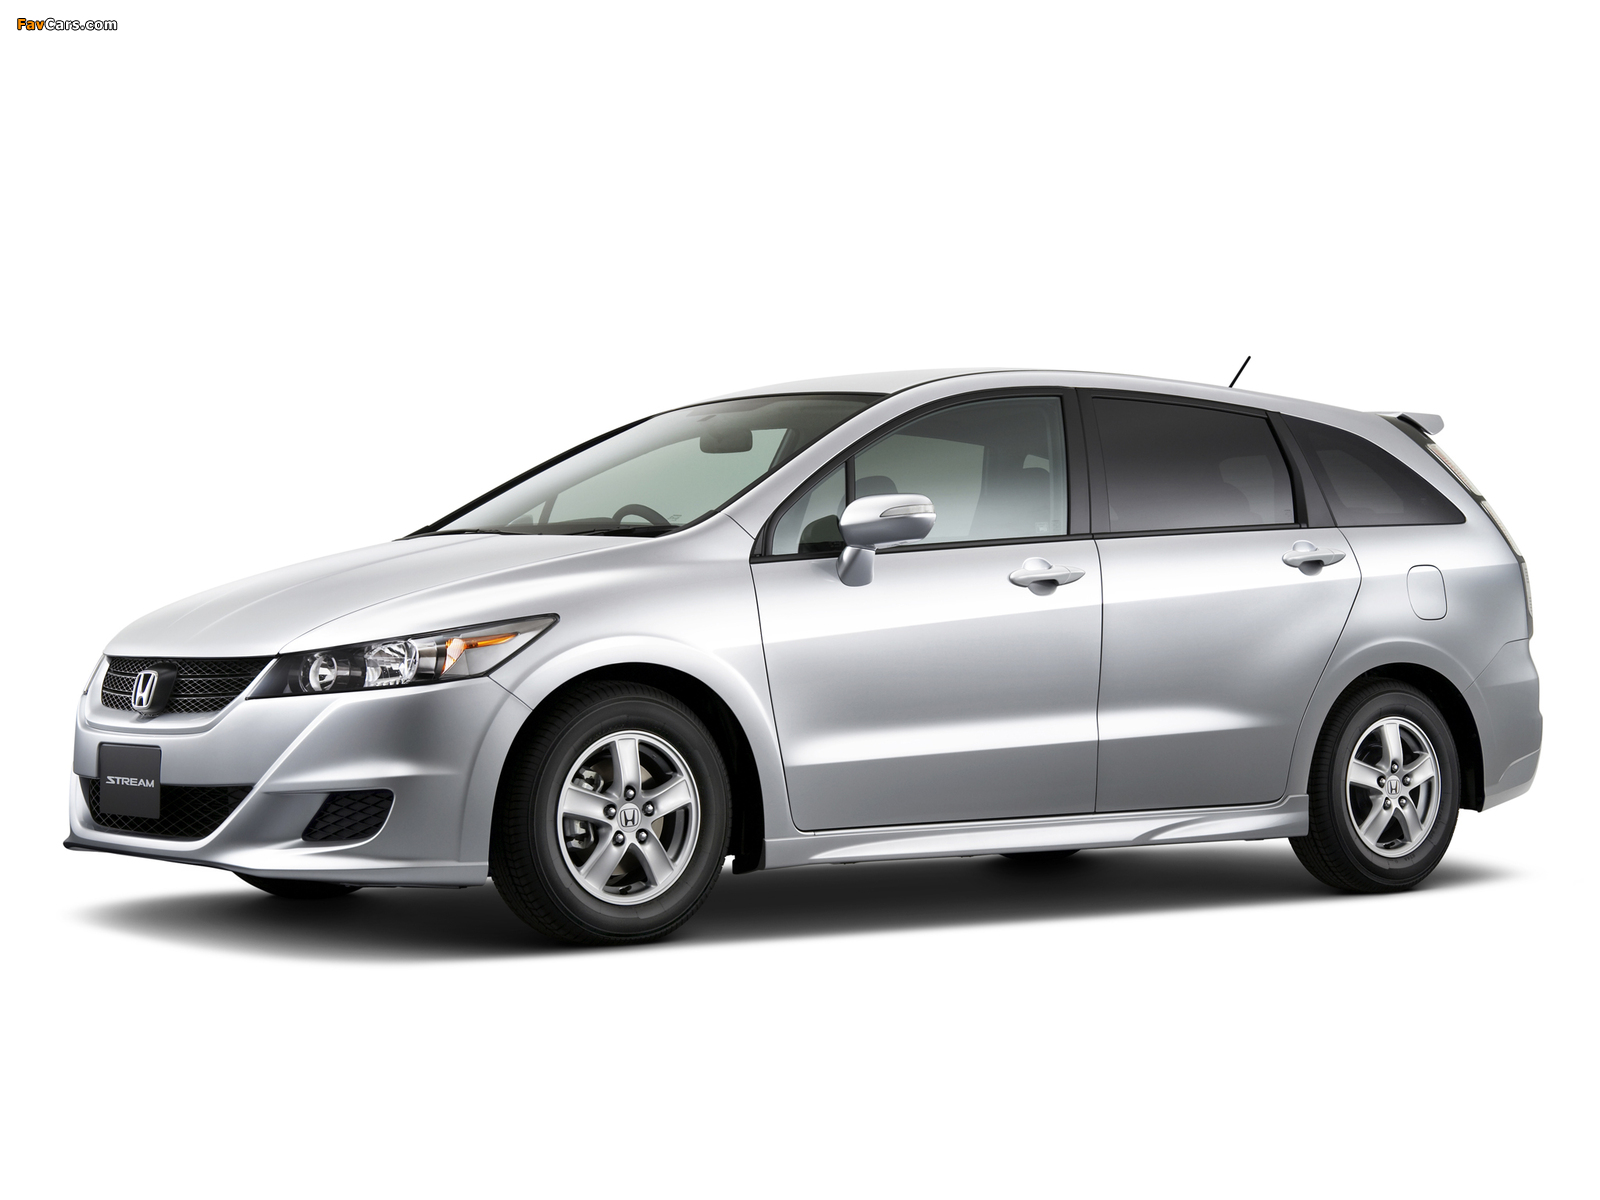 Honda Stream Sporty Edition (RN6) 2011 pictures (1600 x 1200)